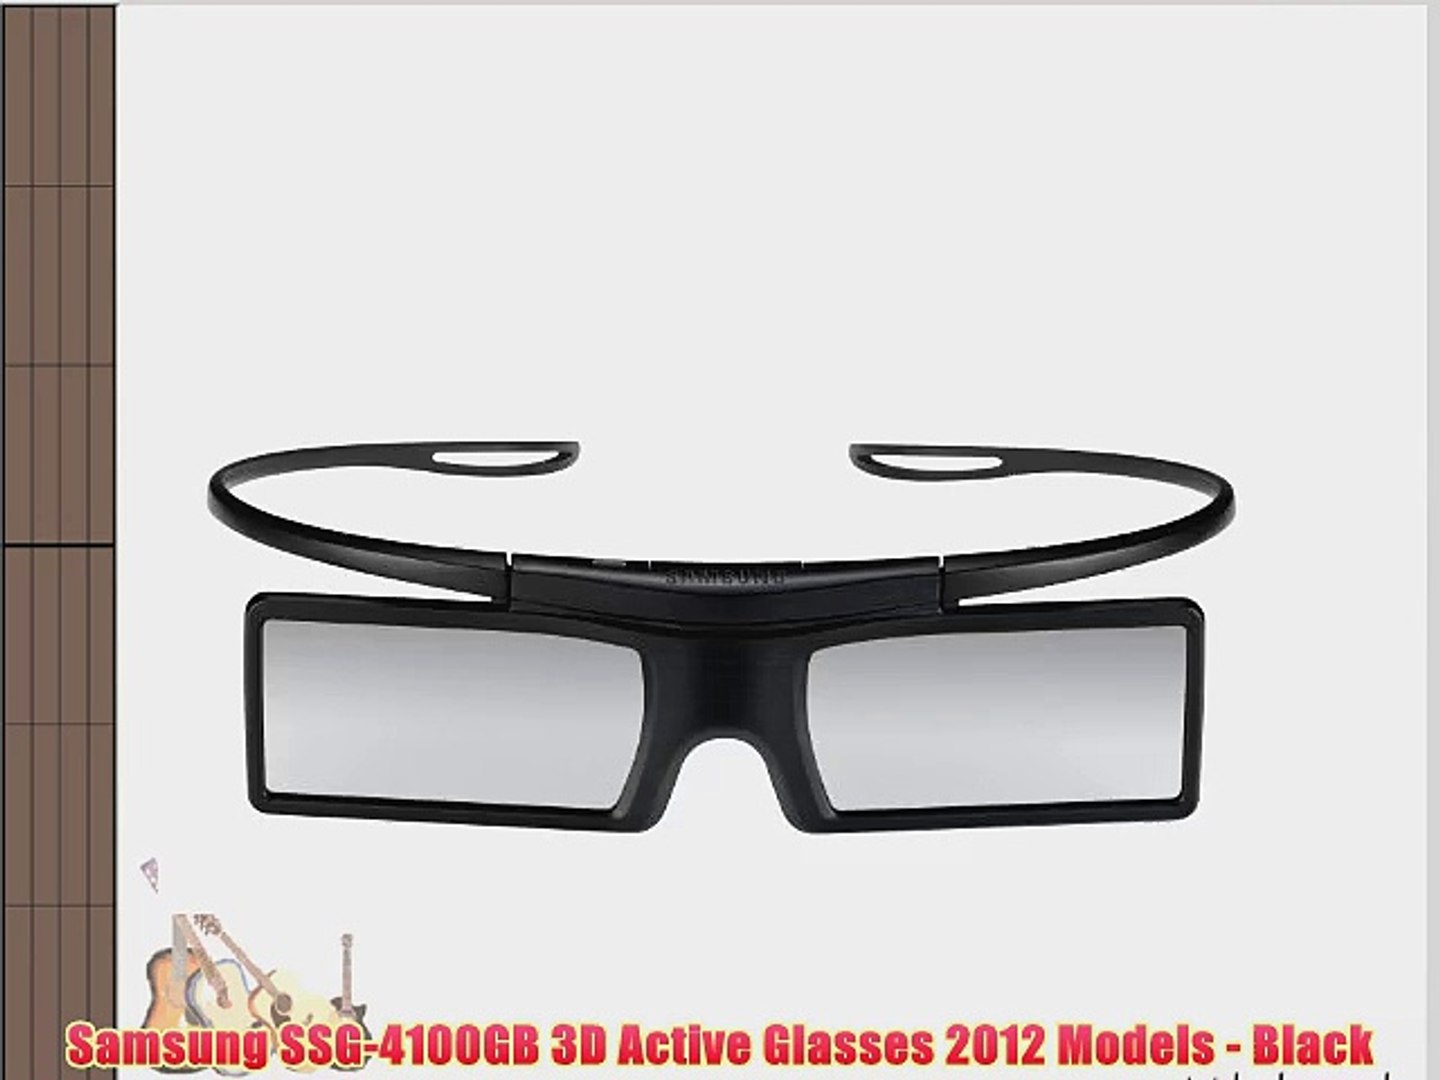 Samsung SSG-4100GB 3D Active Glasses 2012 Models - Black - video Dailymotion